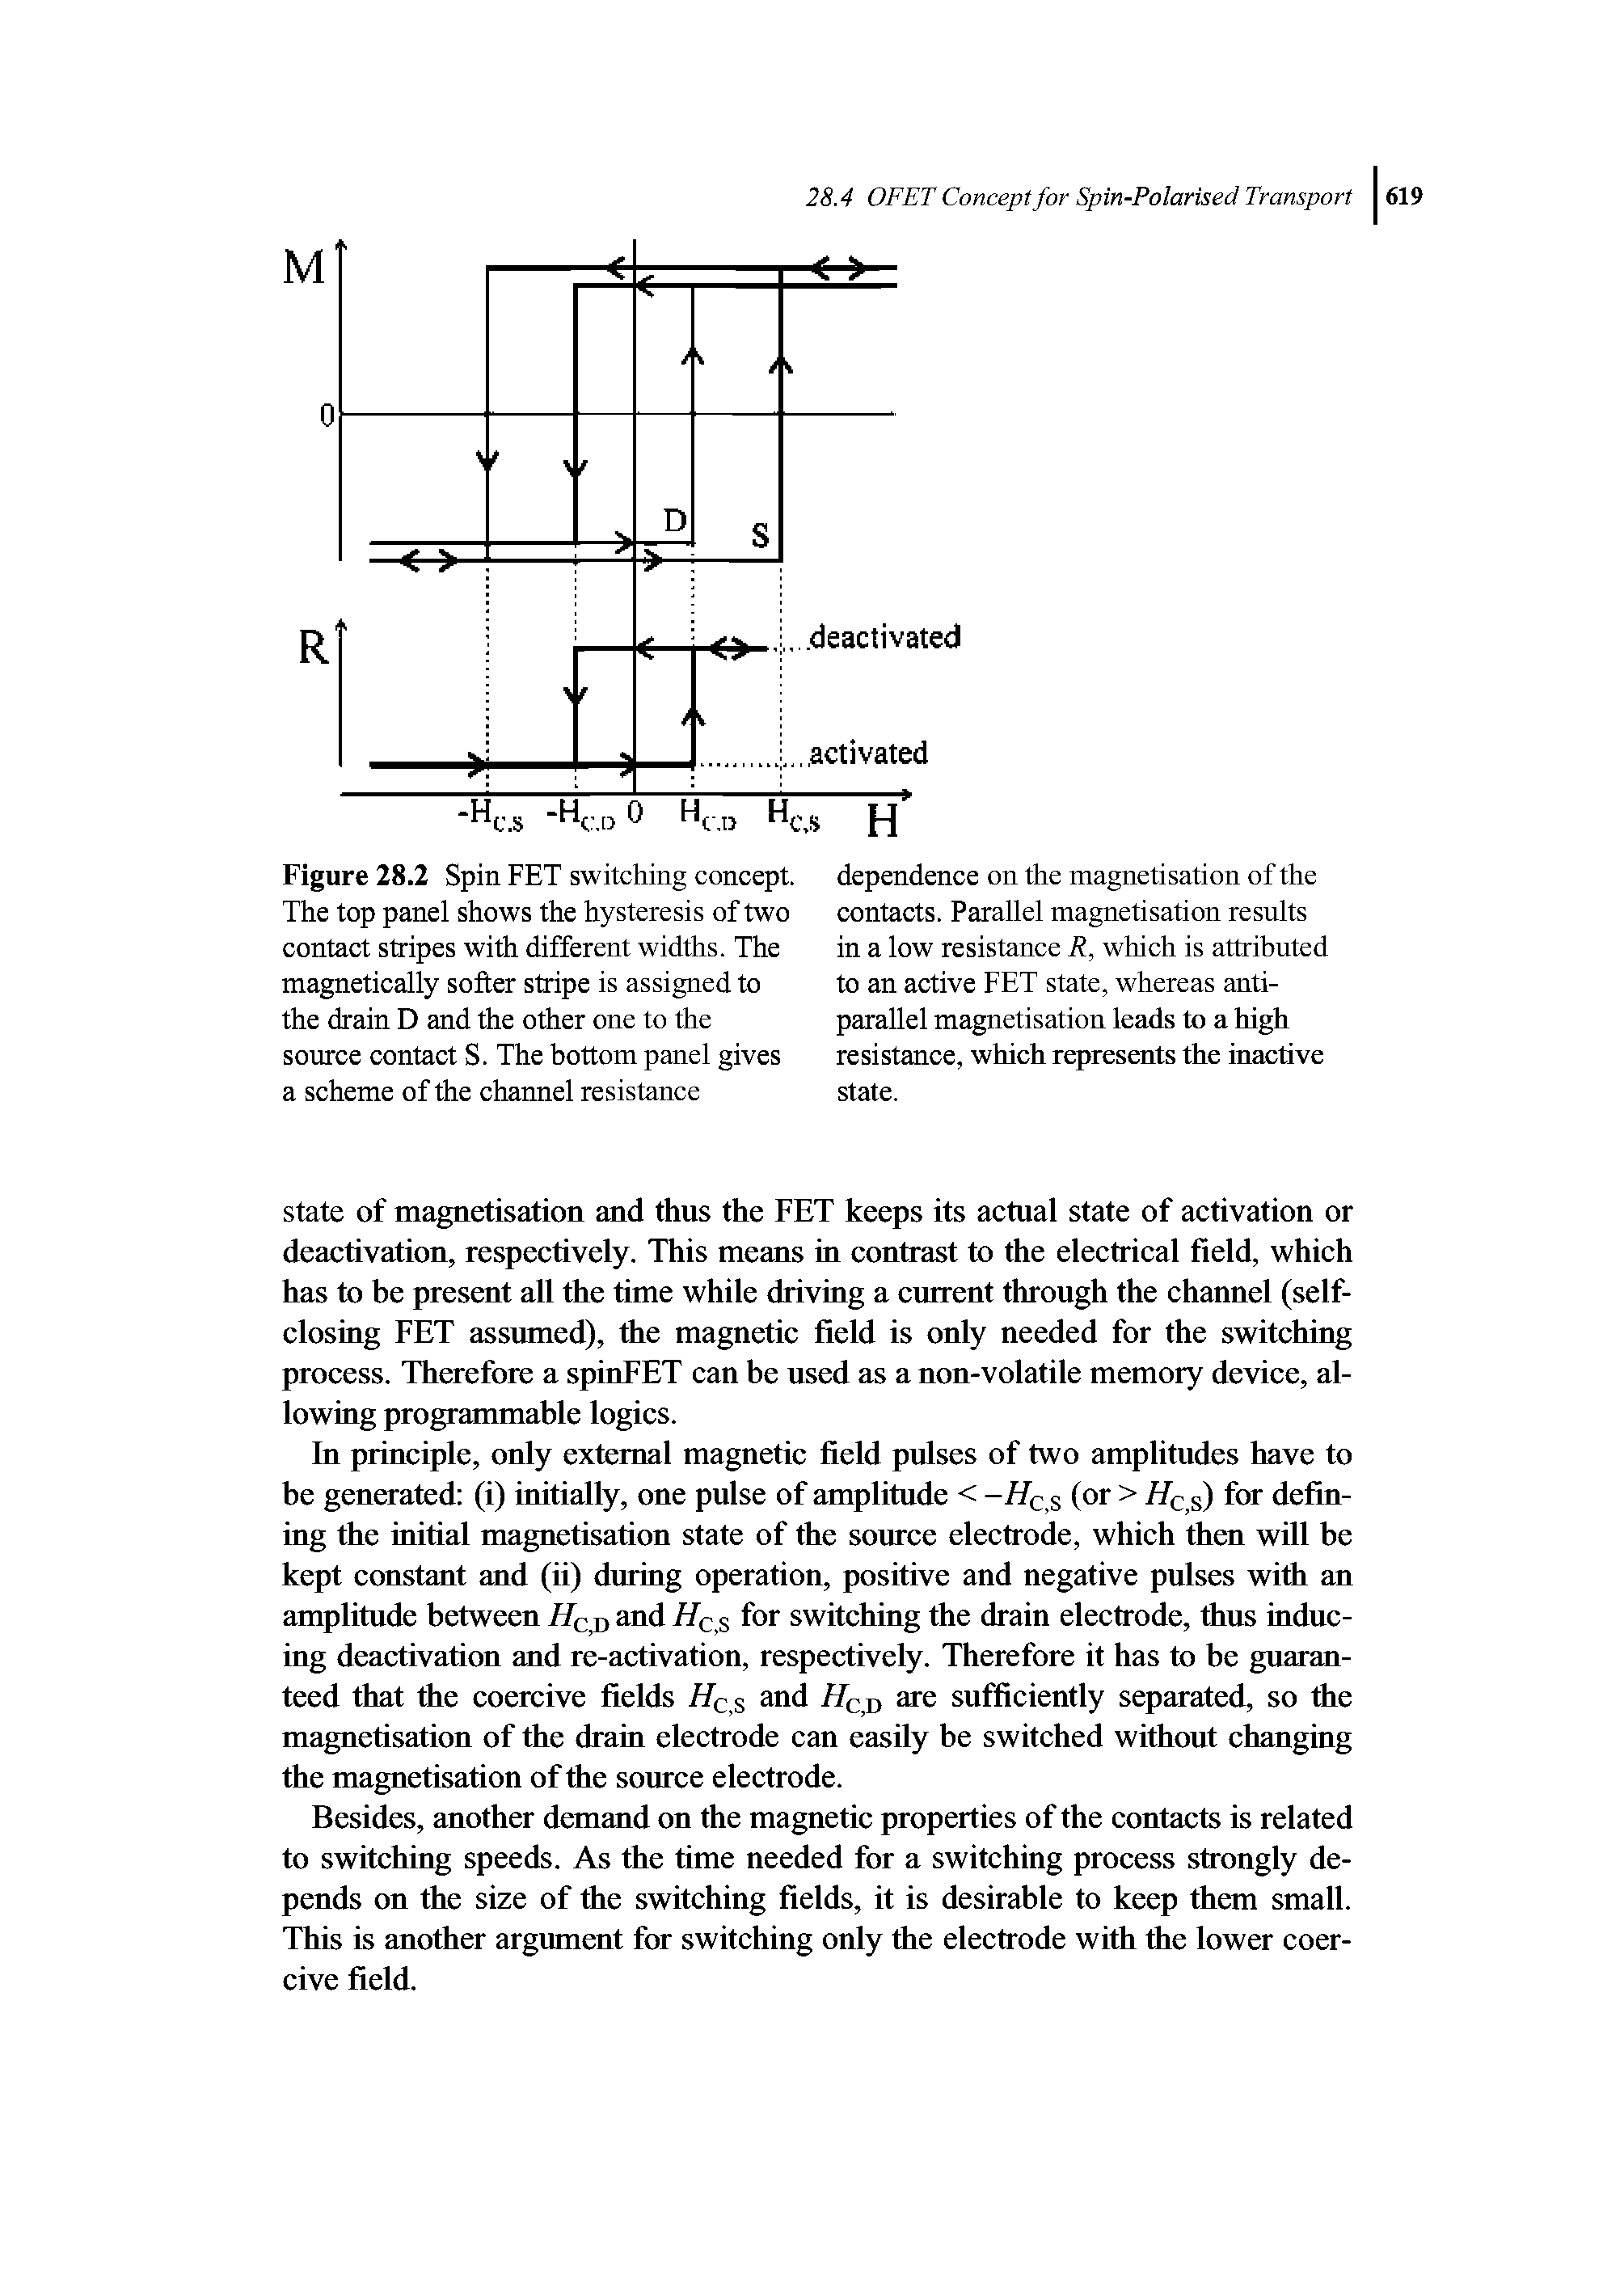 Figure 28.2 Spin FET switching concept. The top panel shows the hysteresis of two contact stripes with different widths. The magnetically softer stripe is assigned to the drain D and the other one to the source contact S. The bottom panel gives a scheme of the channel resistance...